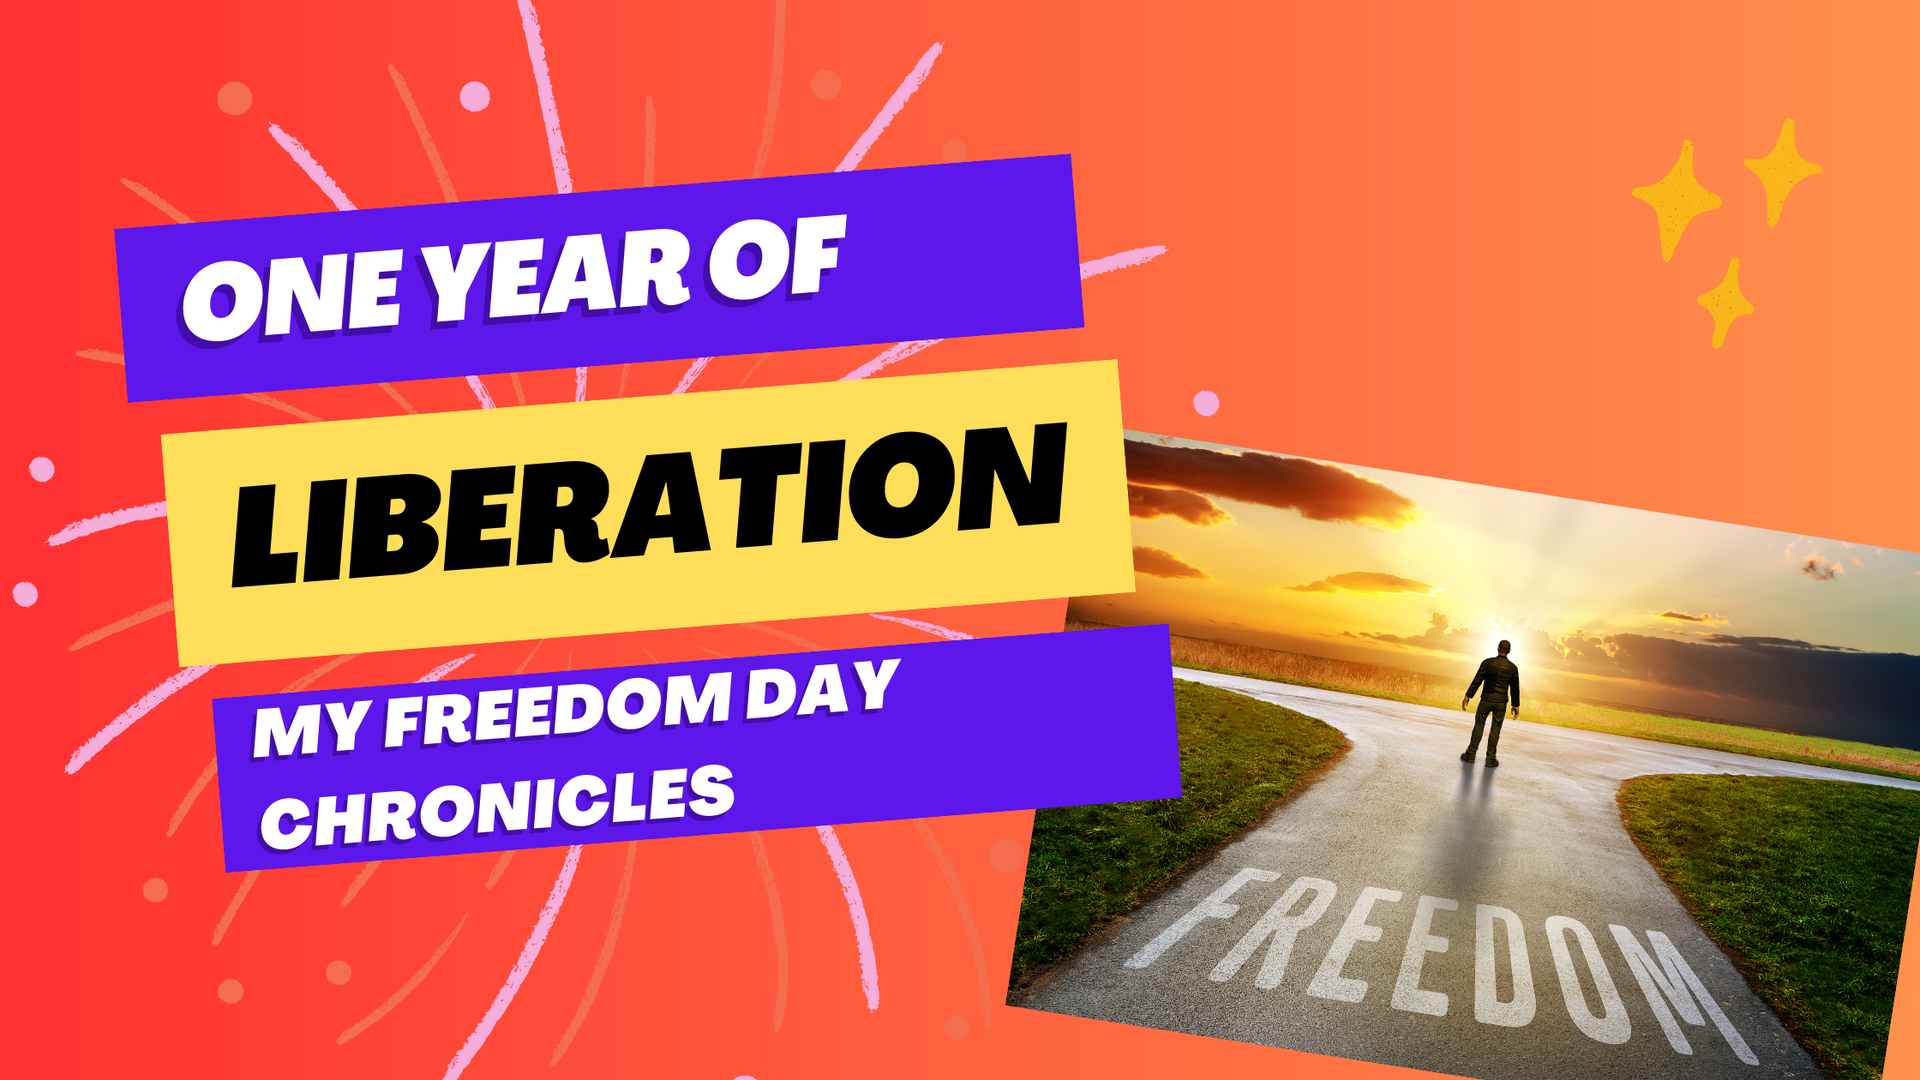 Jeff Kikel reflects on one year after his Freedom Day.